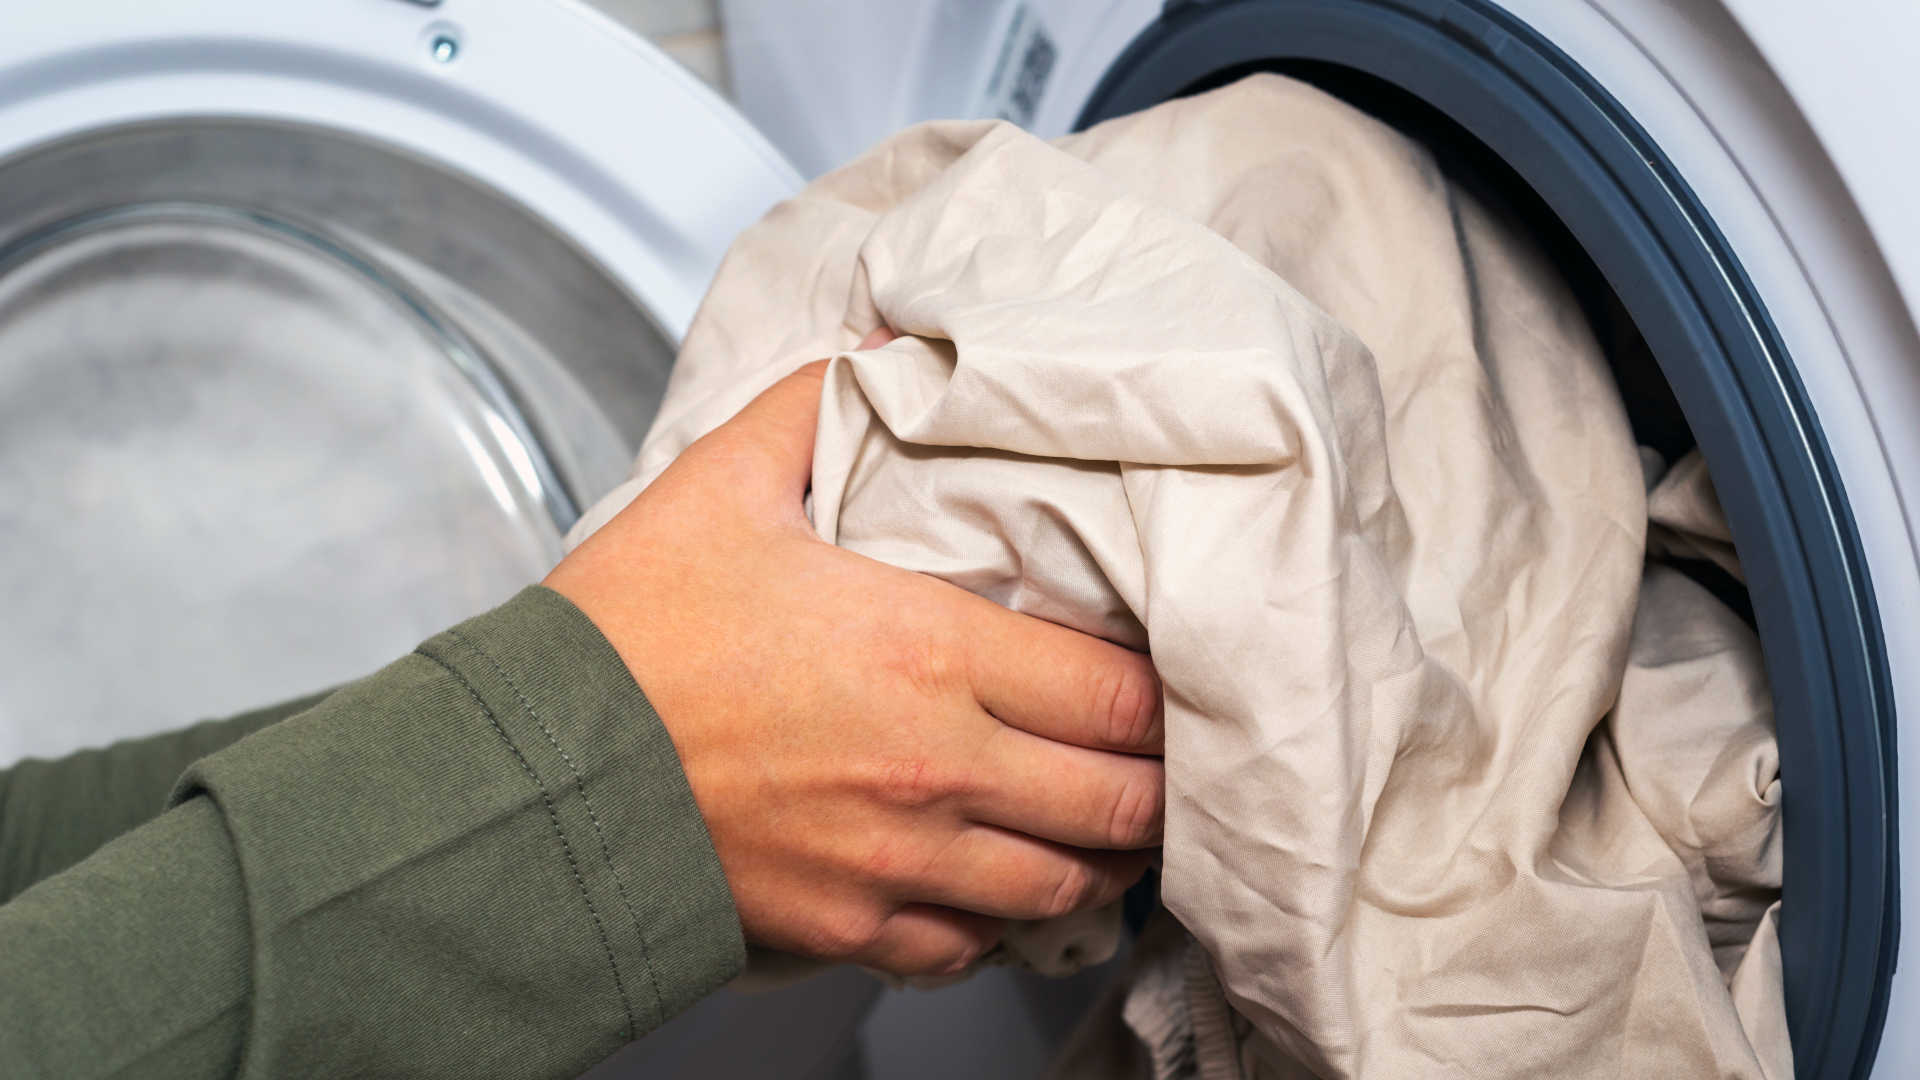 The Four Greatest Benefits of a Dryer